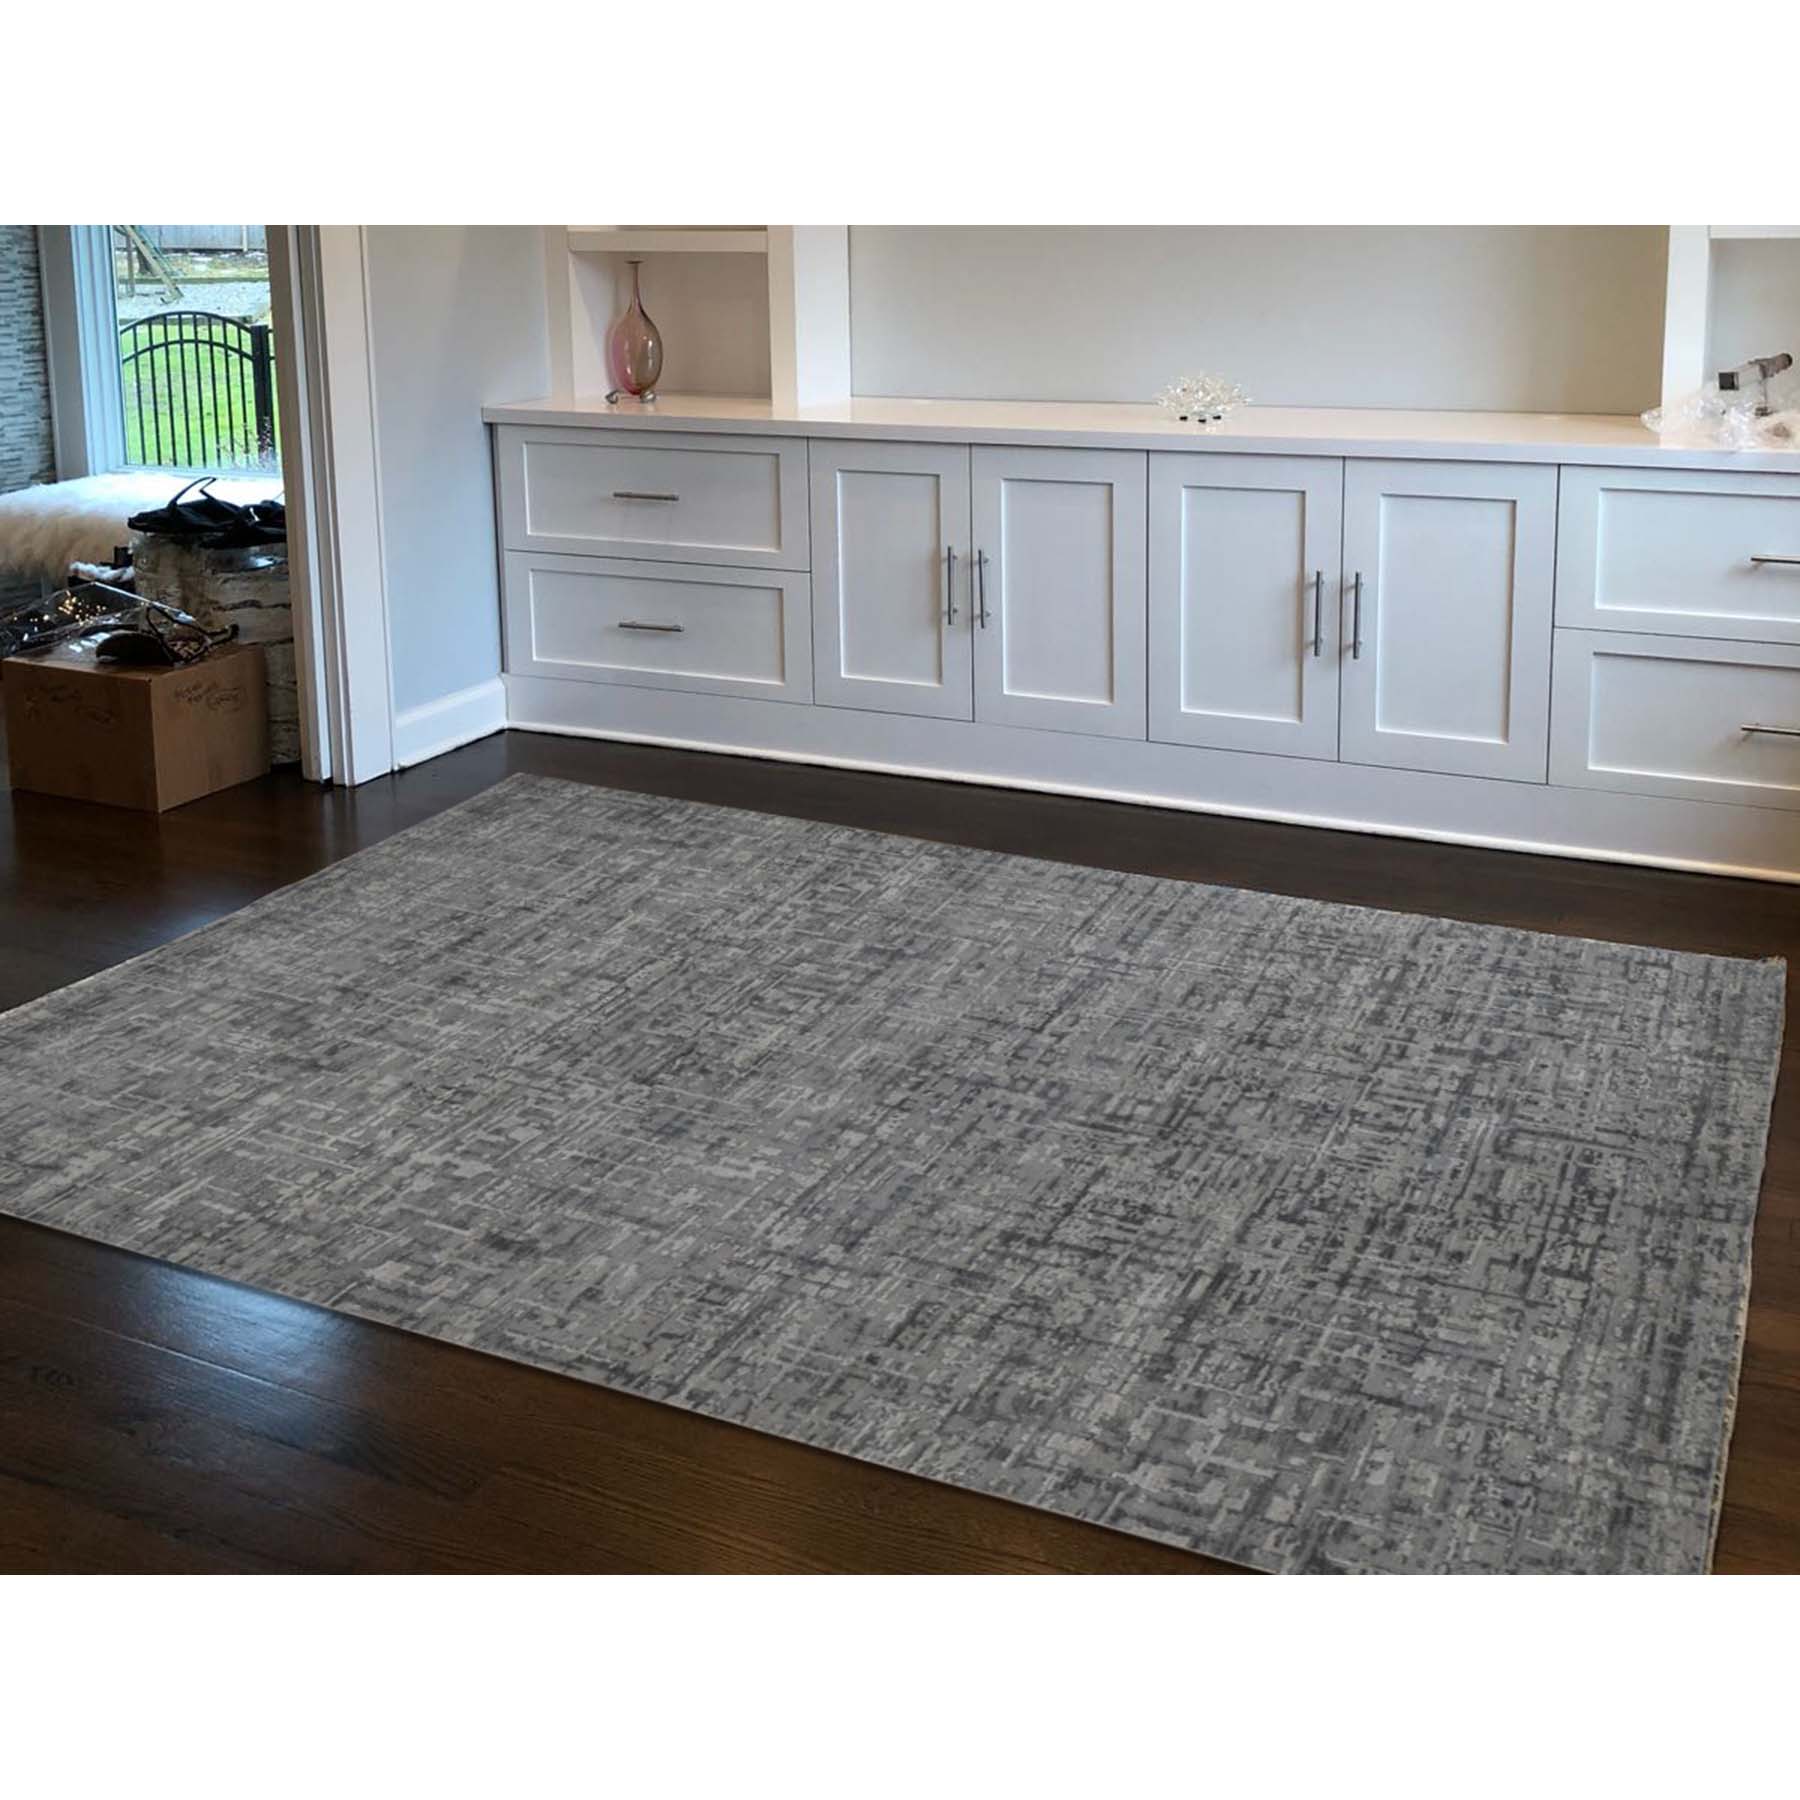 6-2 x9-3  THE MATRIX Pure Silk with Textured Wool Tone on Tone Hand-Knotted Rug 